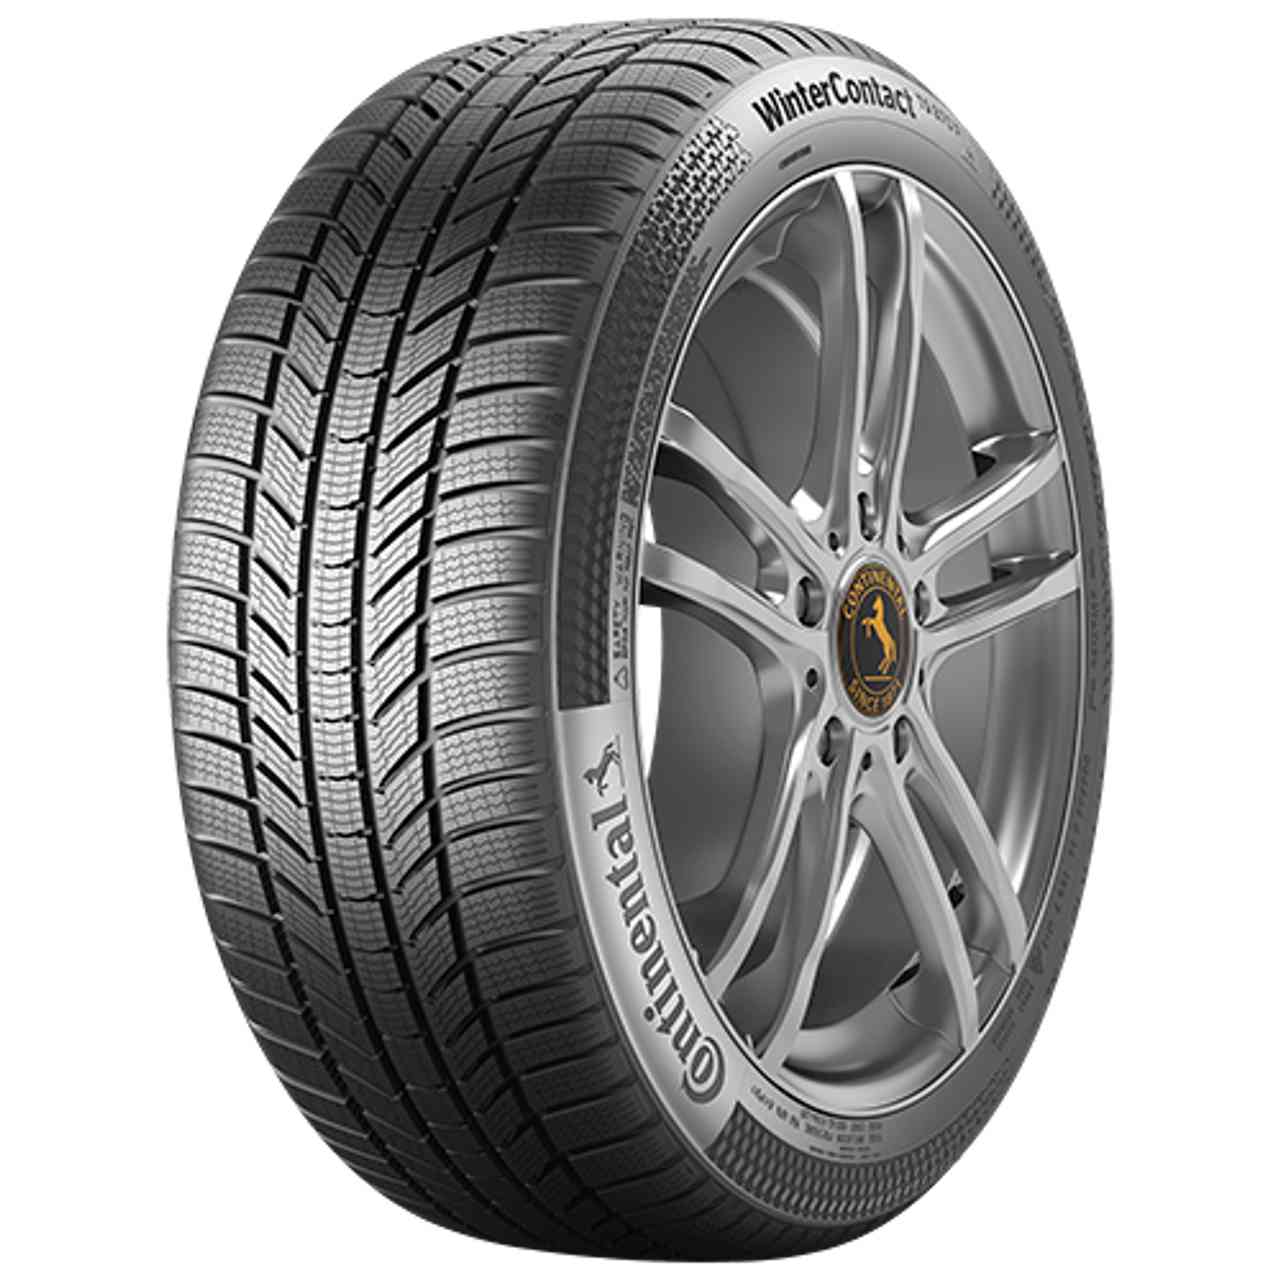 CONTINENTAL WINTERCONTACT TS 870 P (EVc) 235/45R18 94V FR BSW